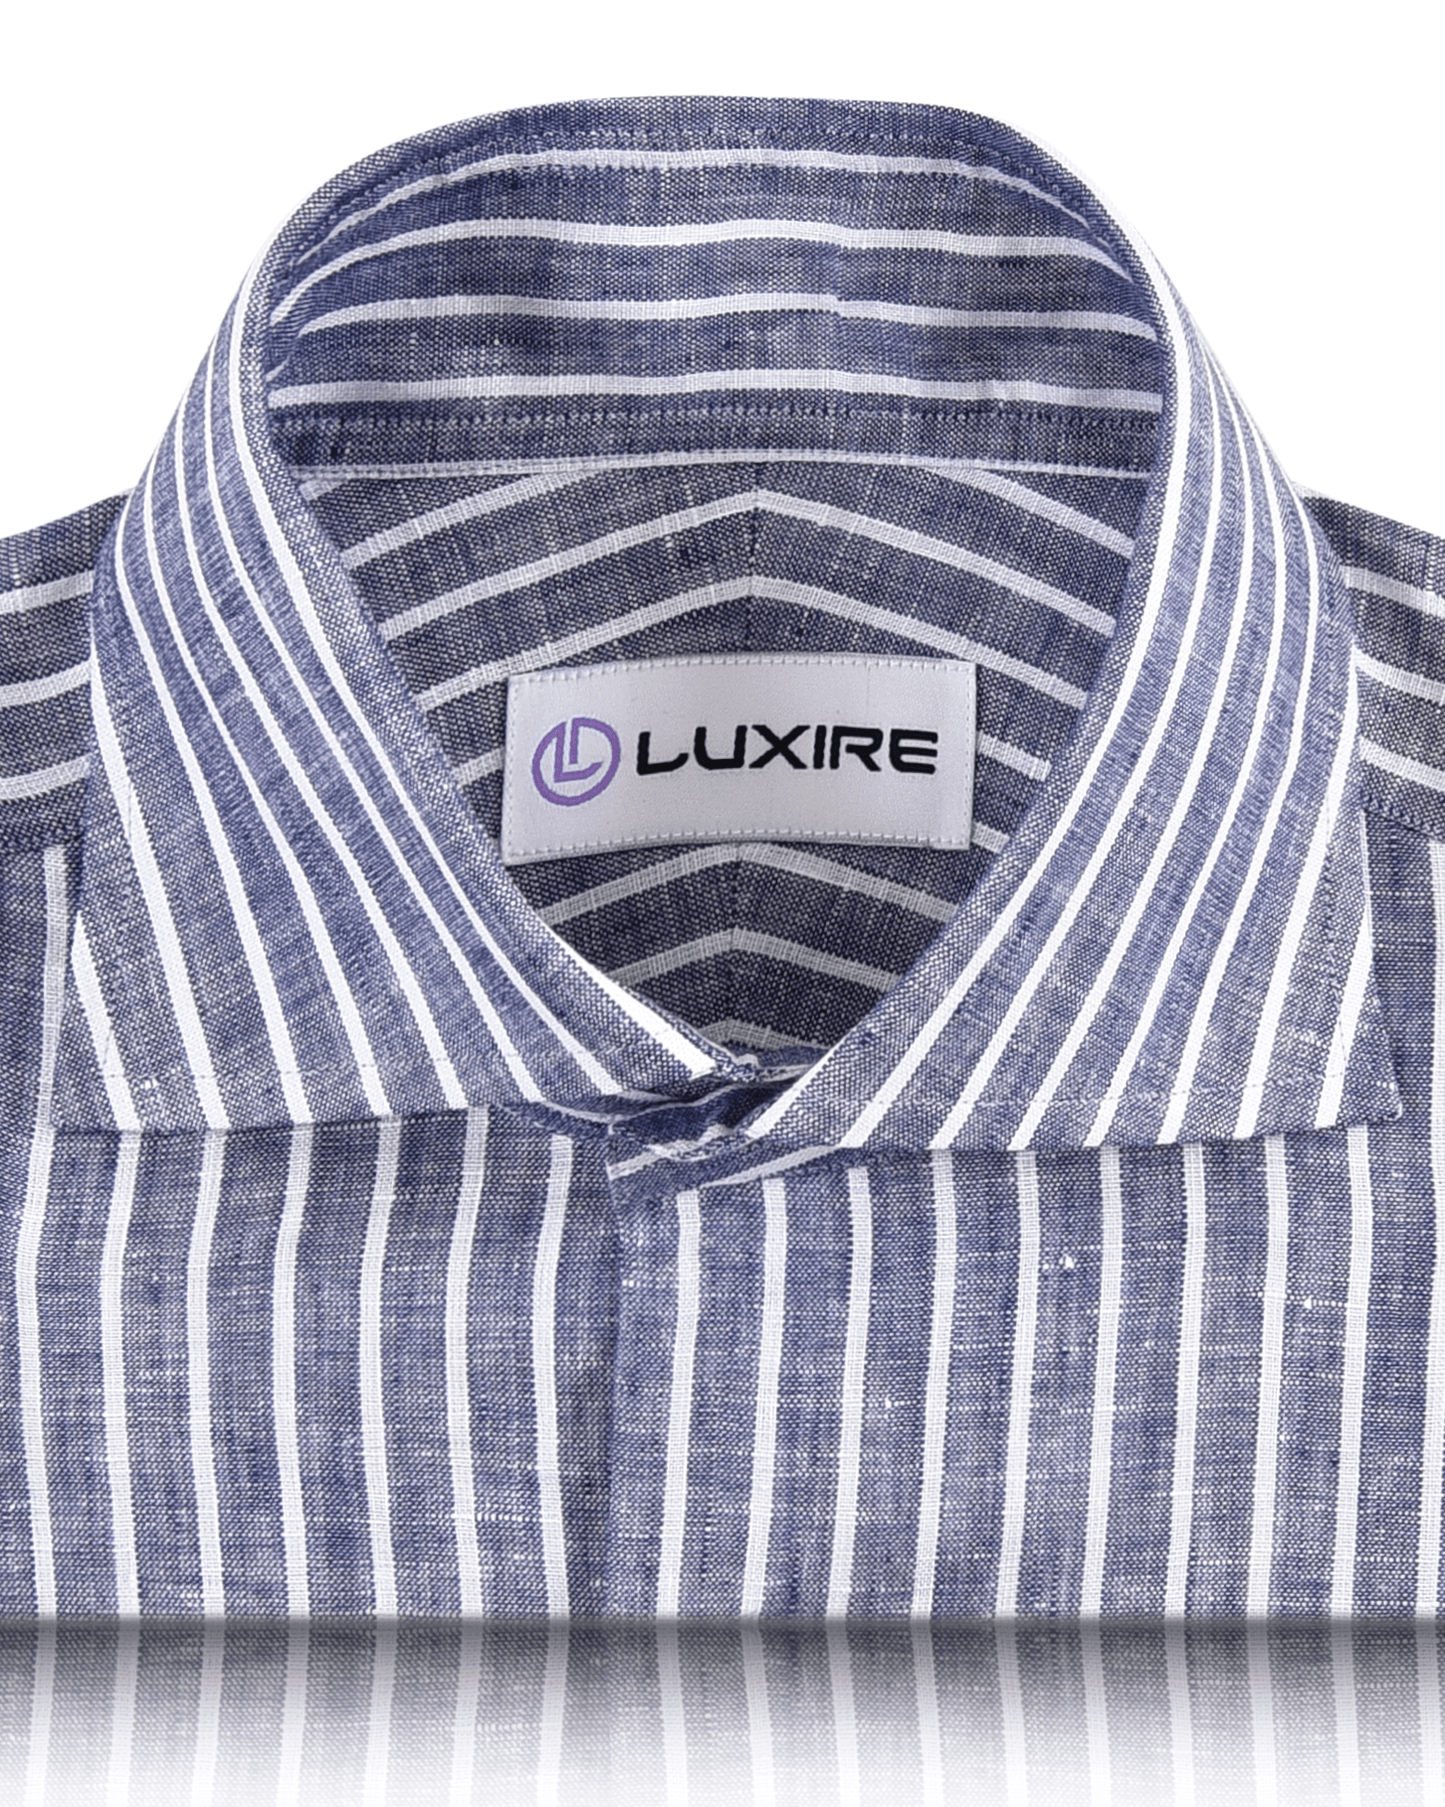 Collar of custom linen shirt for men in blue chambray with white stripes